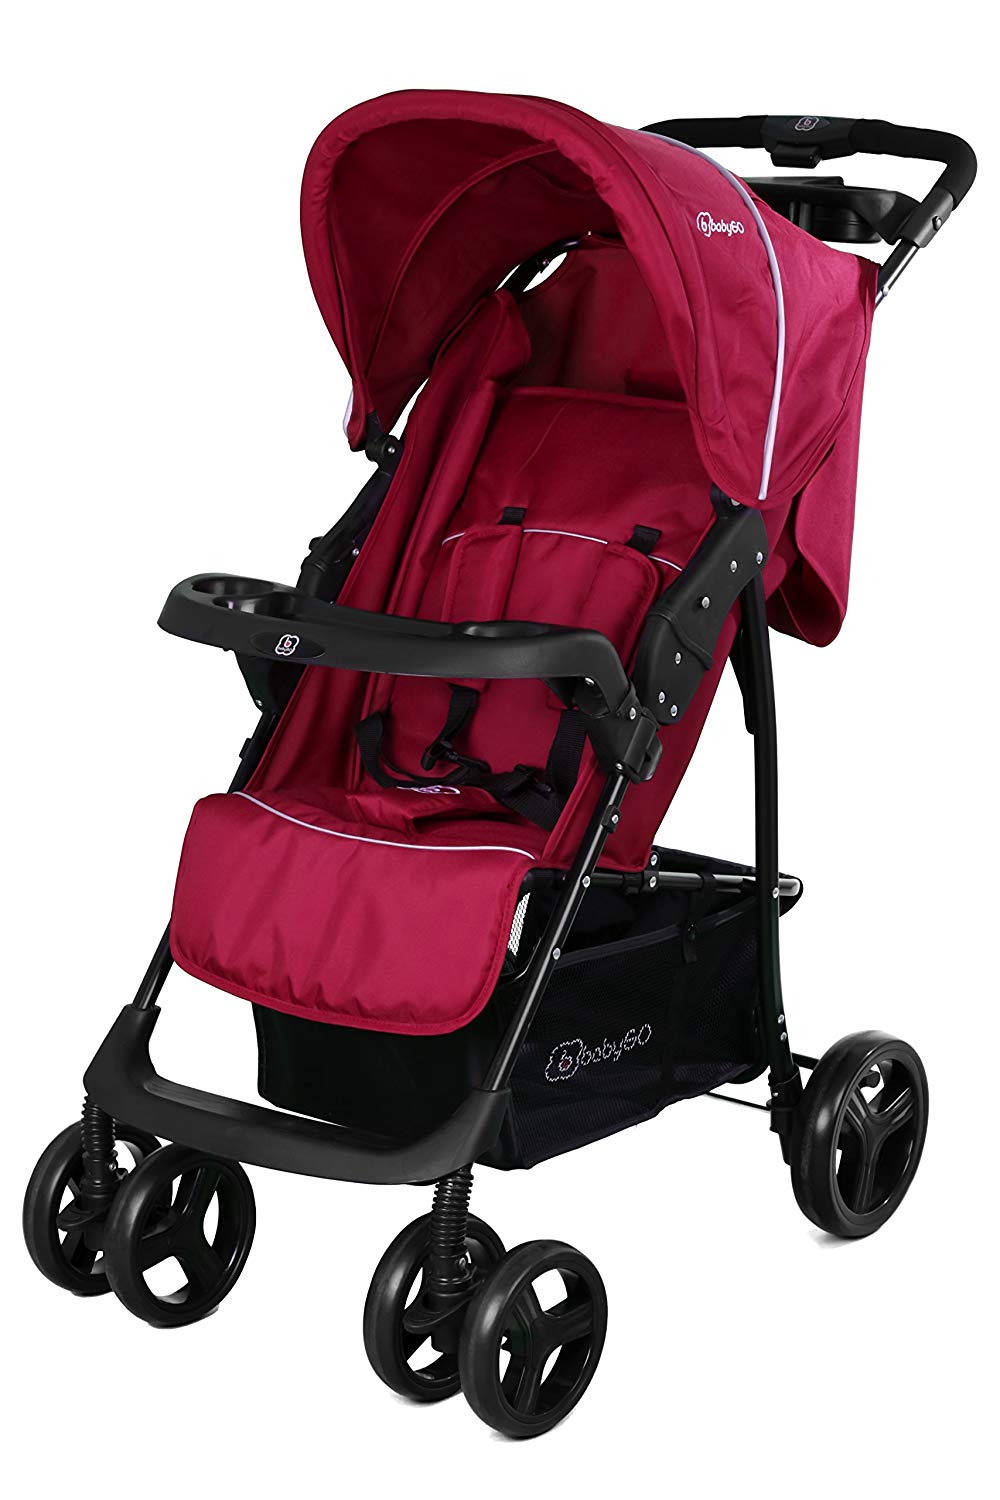 BabyGO 6301 Basket Buggy Sport Pushchair with Full Reclining Function Optional 2-in-1 Red